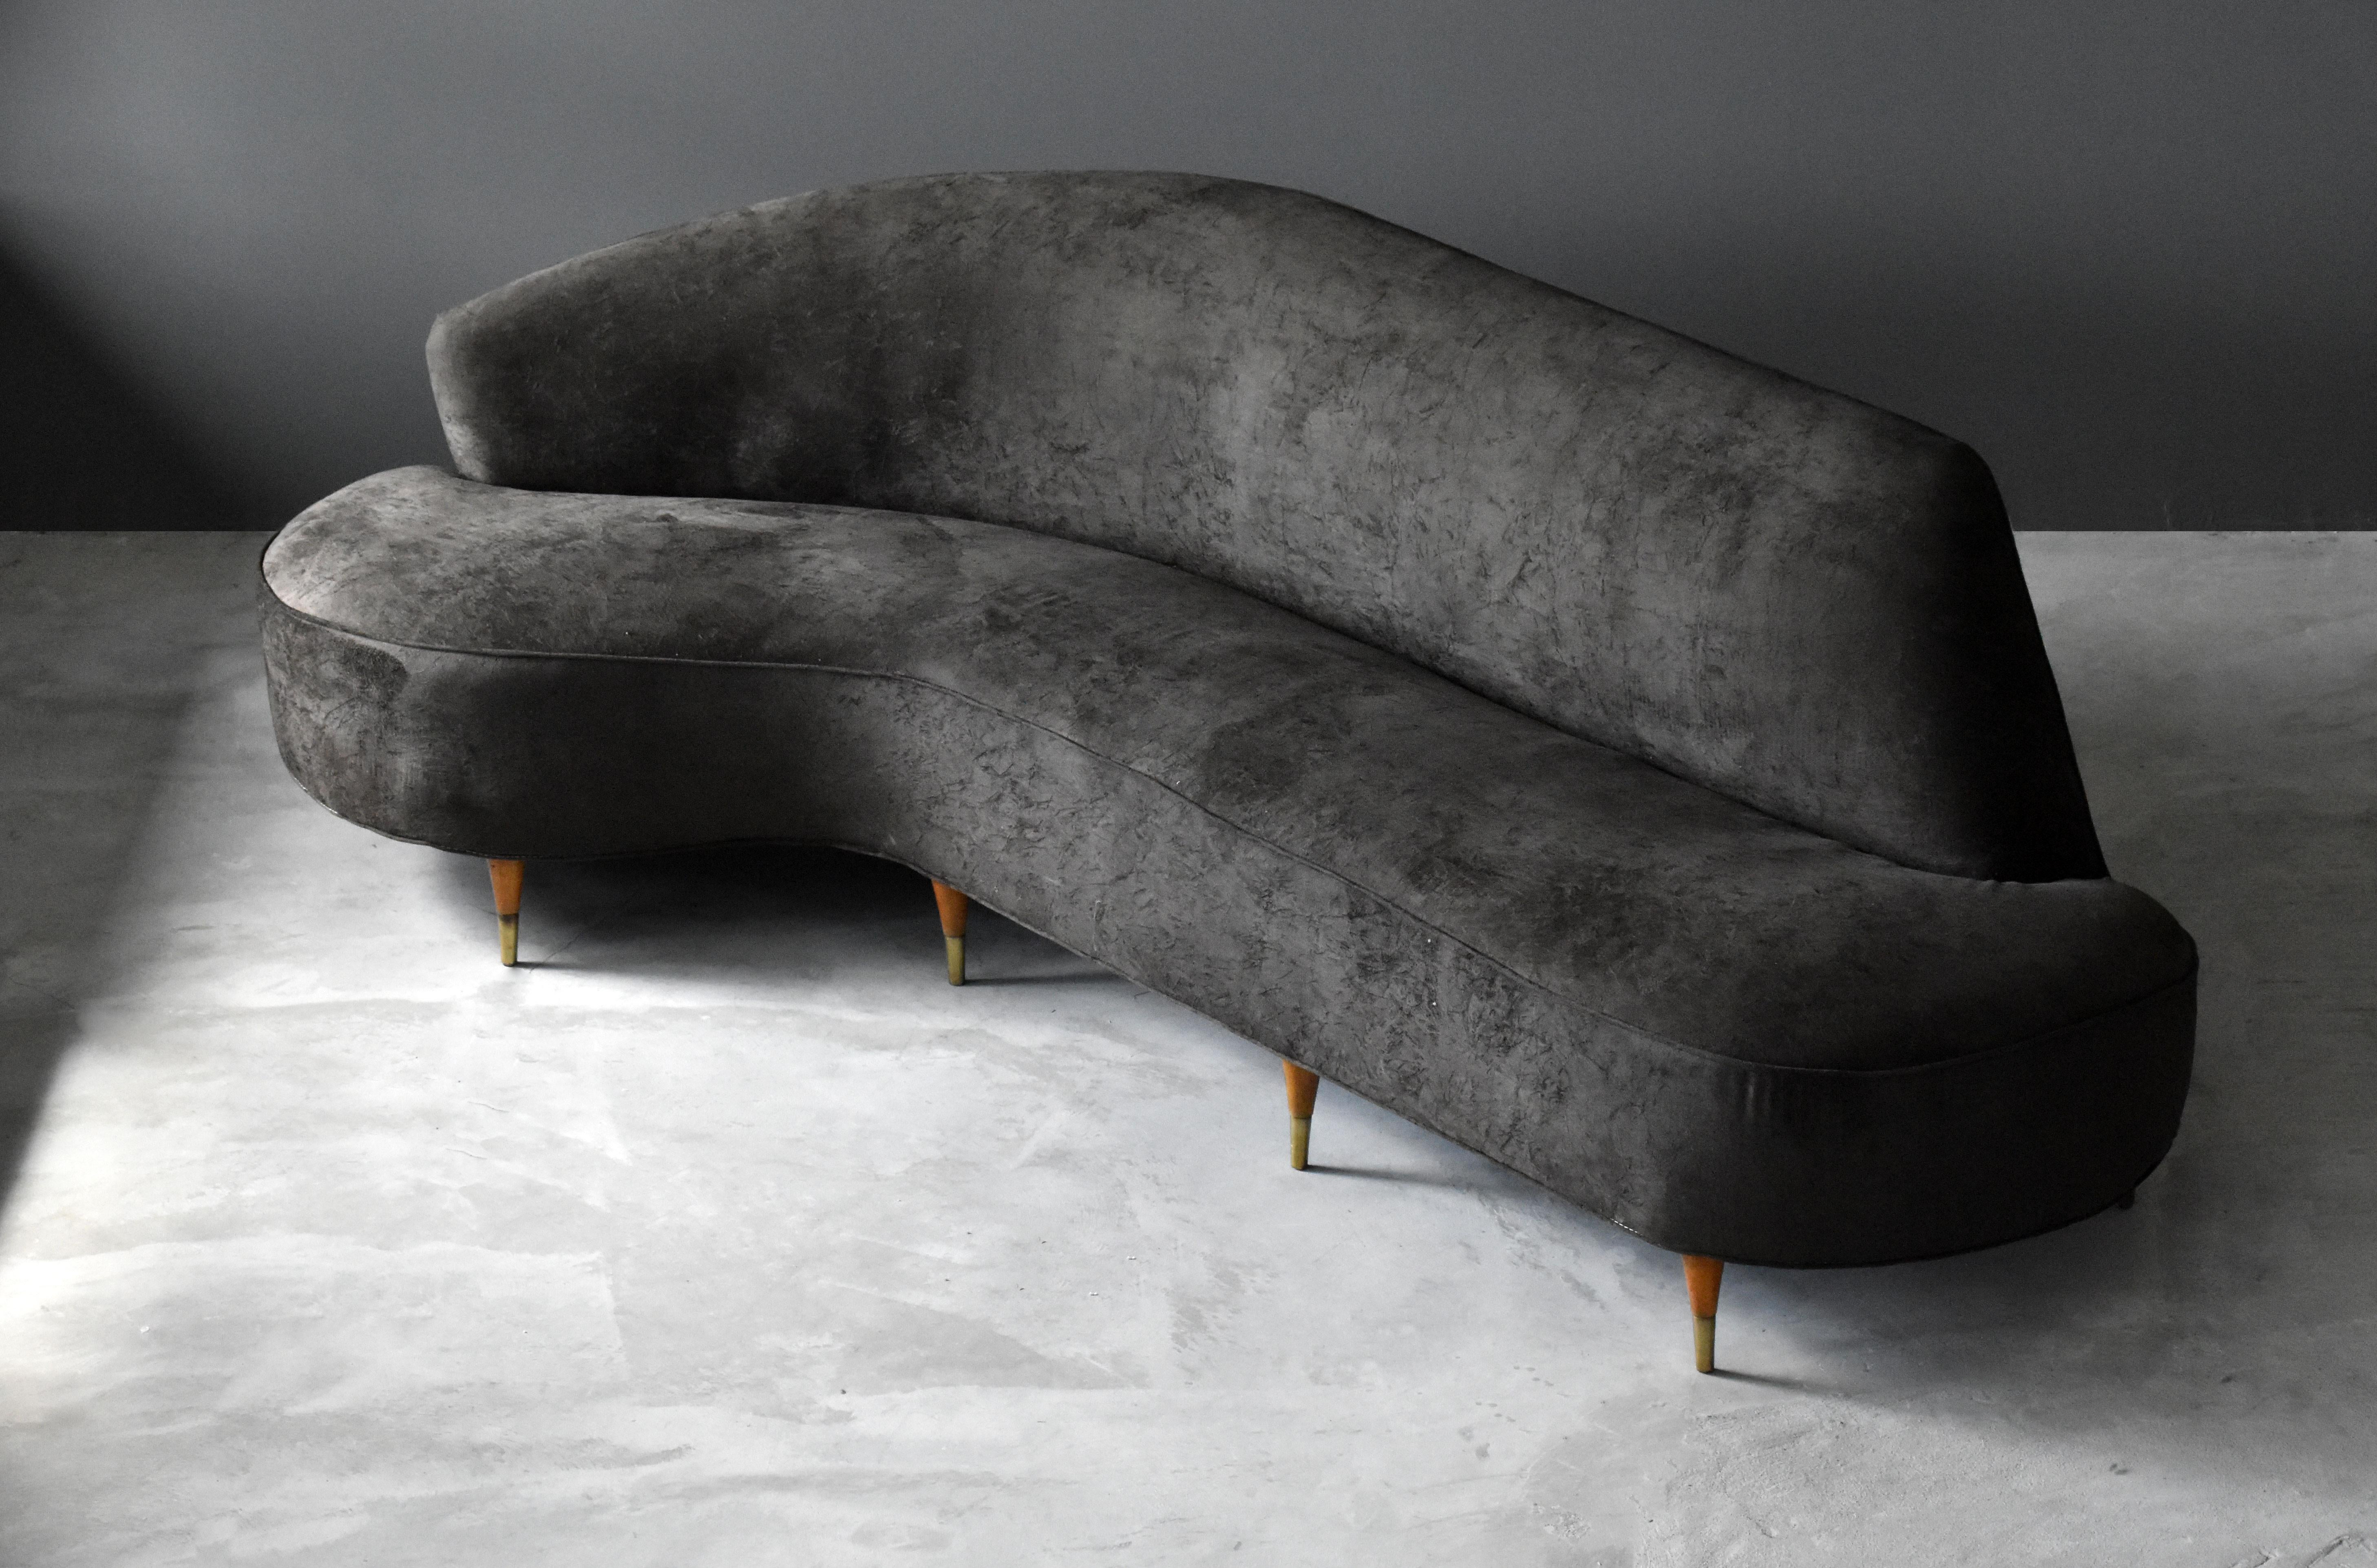 An organic / biomorphic and asymmetric sofa. Designed by an unknown Italian designer. Oak legs bear original brass caps,  upholstered in brown velvet fabric.

Other designers of the period include Federico Munari, Gio Ponti, Ico & Luisa Parisi,